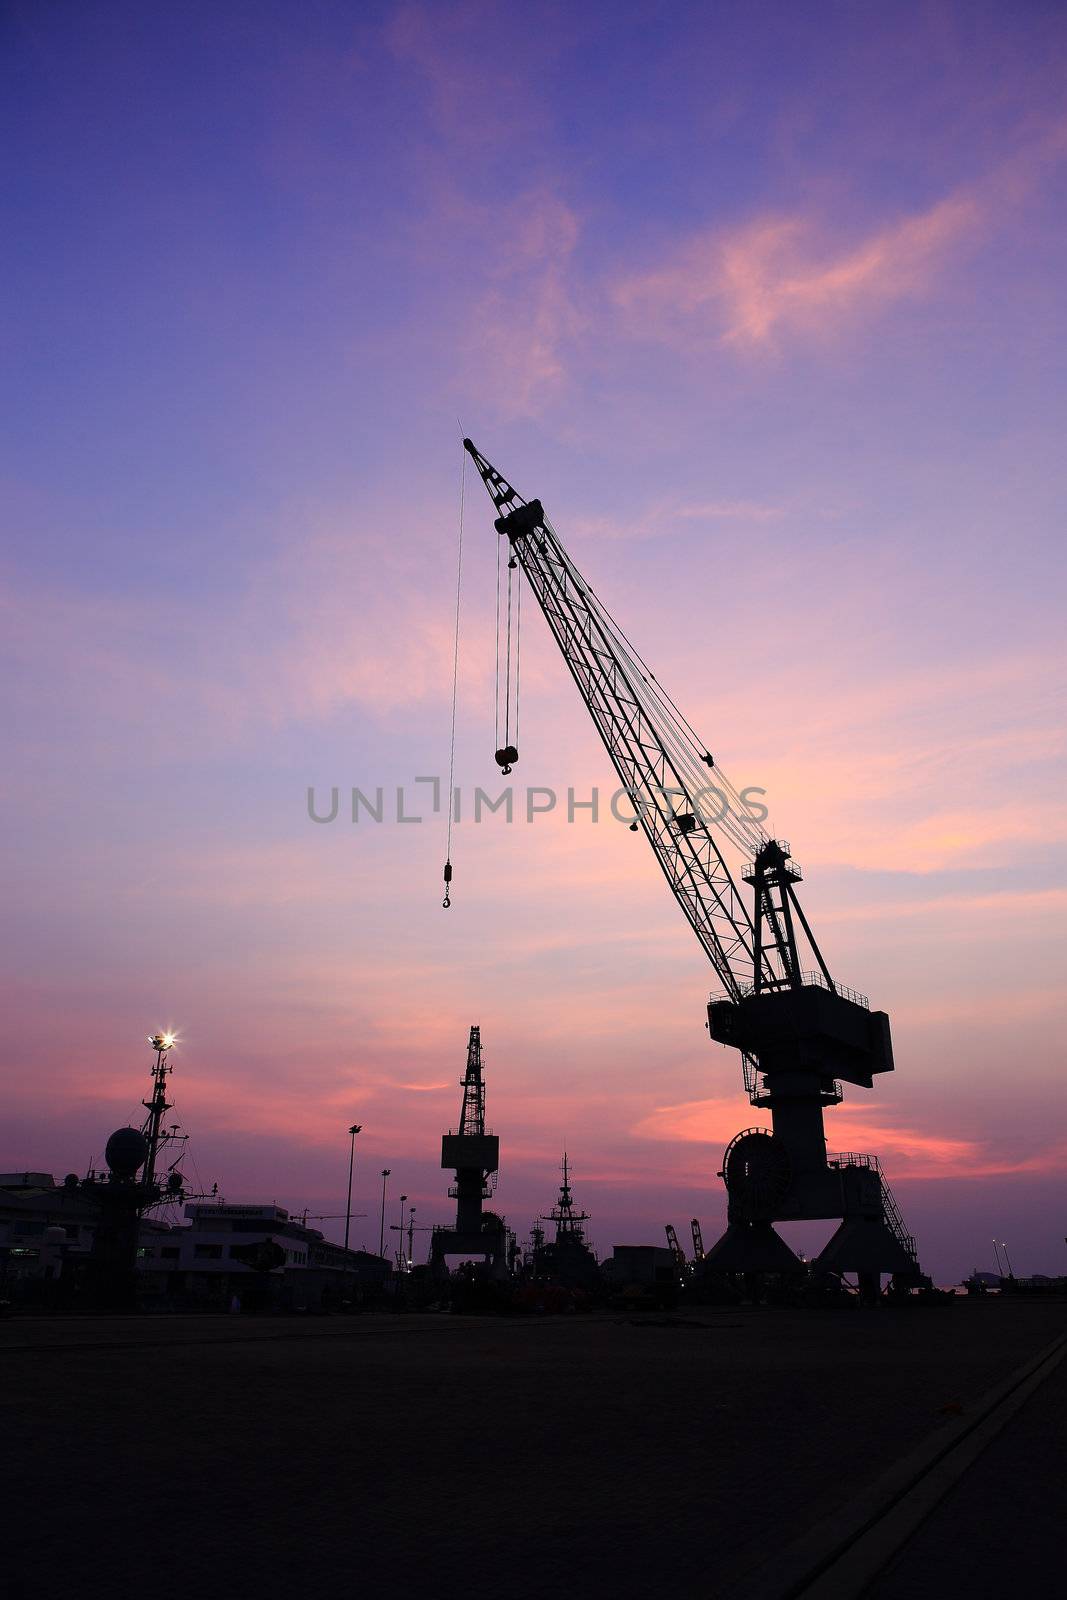 Cranes in dockside at sunset by rufous